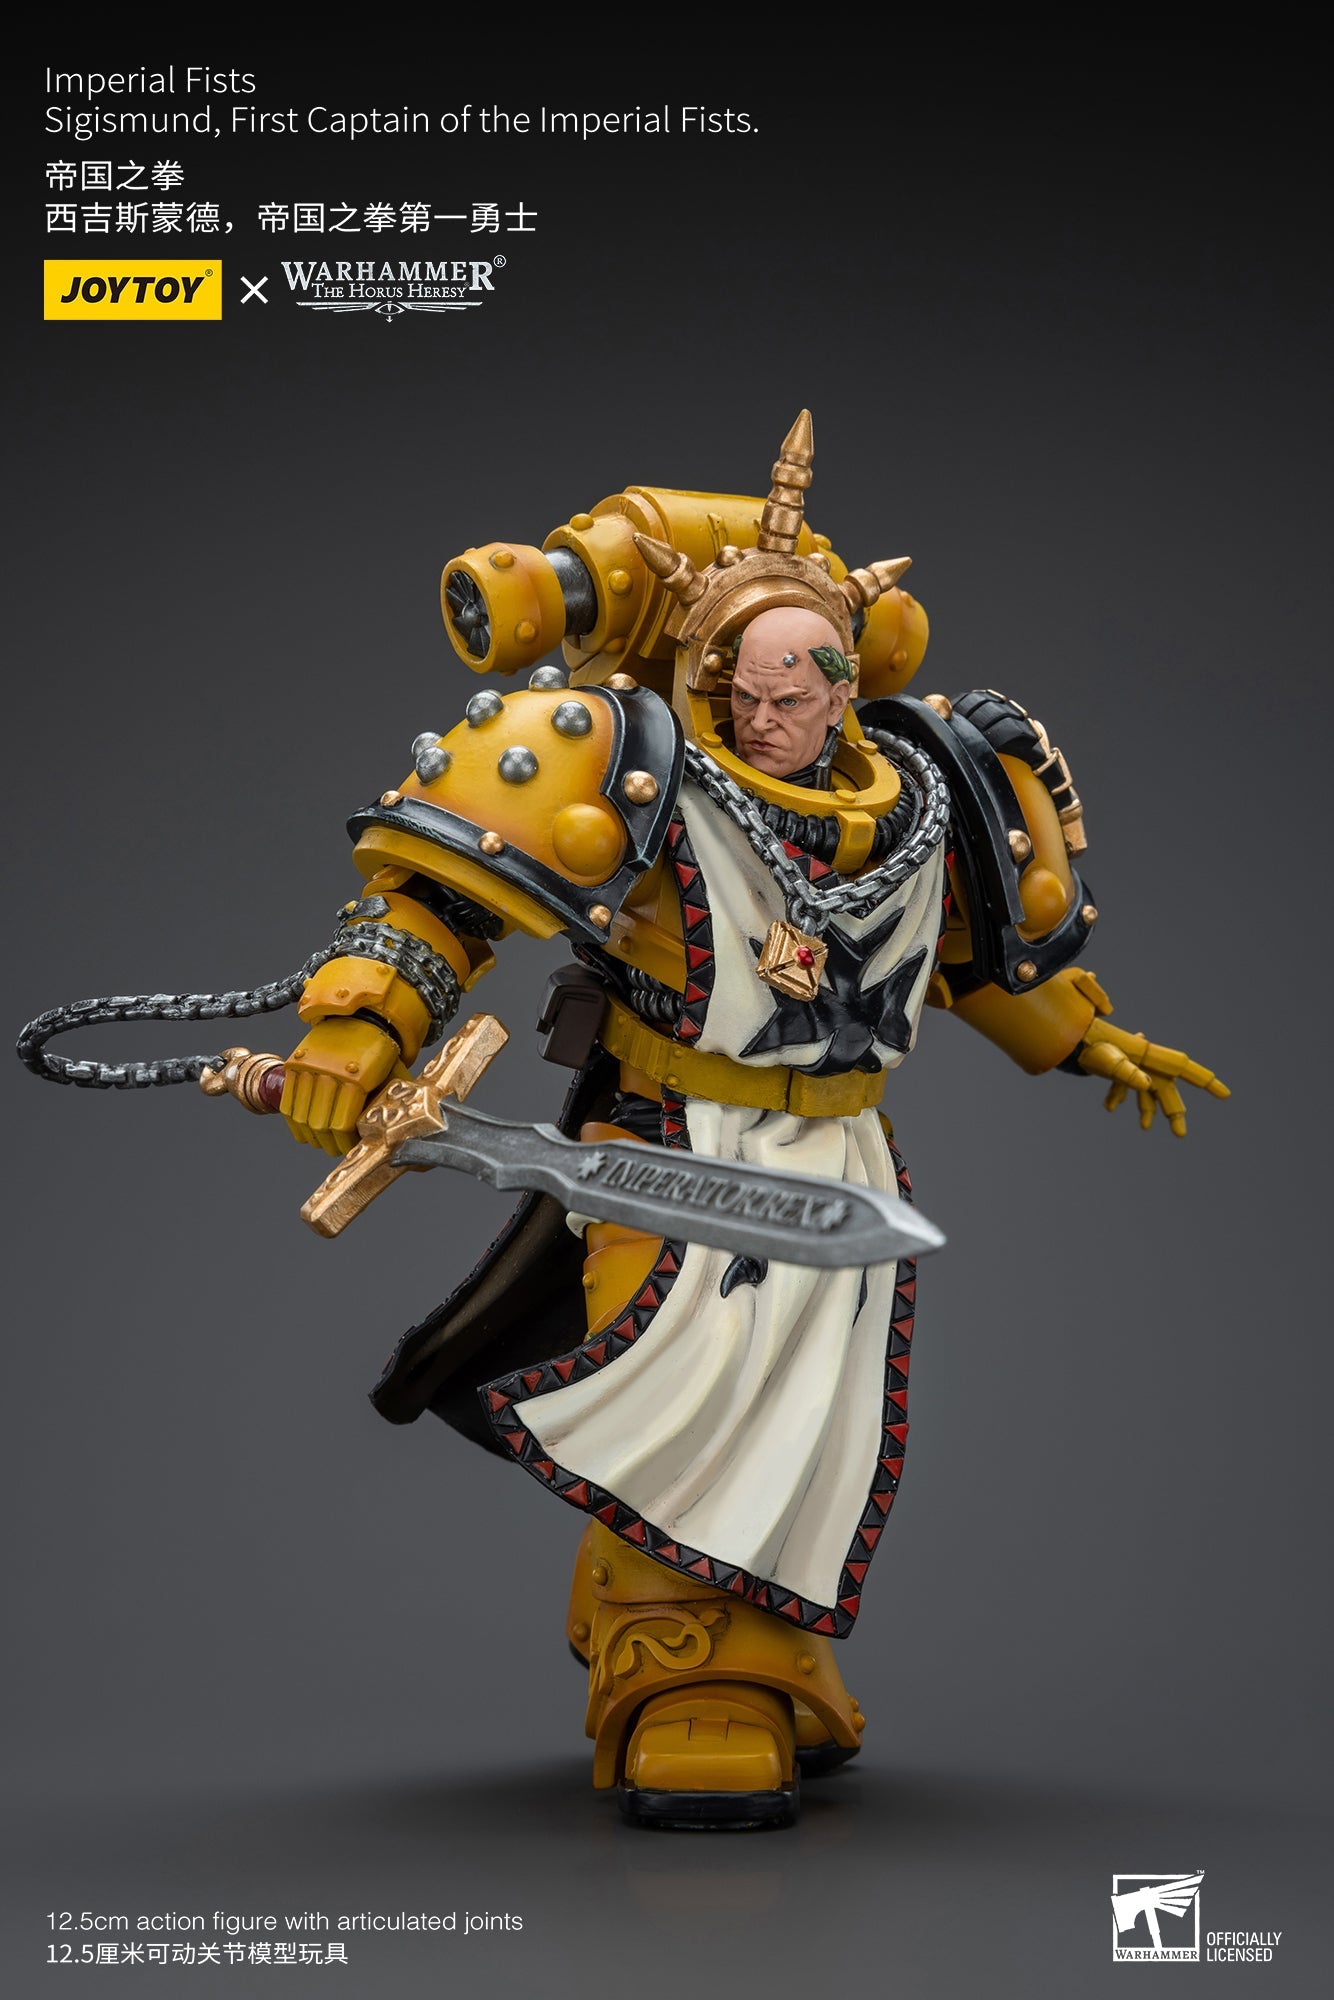 Warhammer The Horus Heresy Imperial Fists Sigismund, First Captain of the Imperial Fists (In Stock)